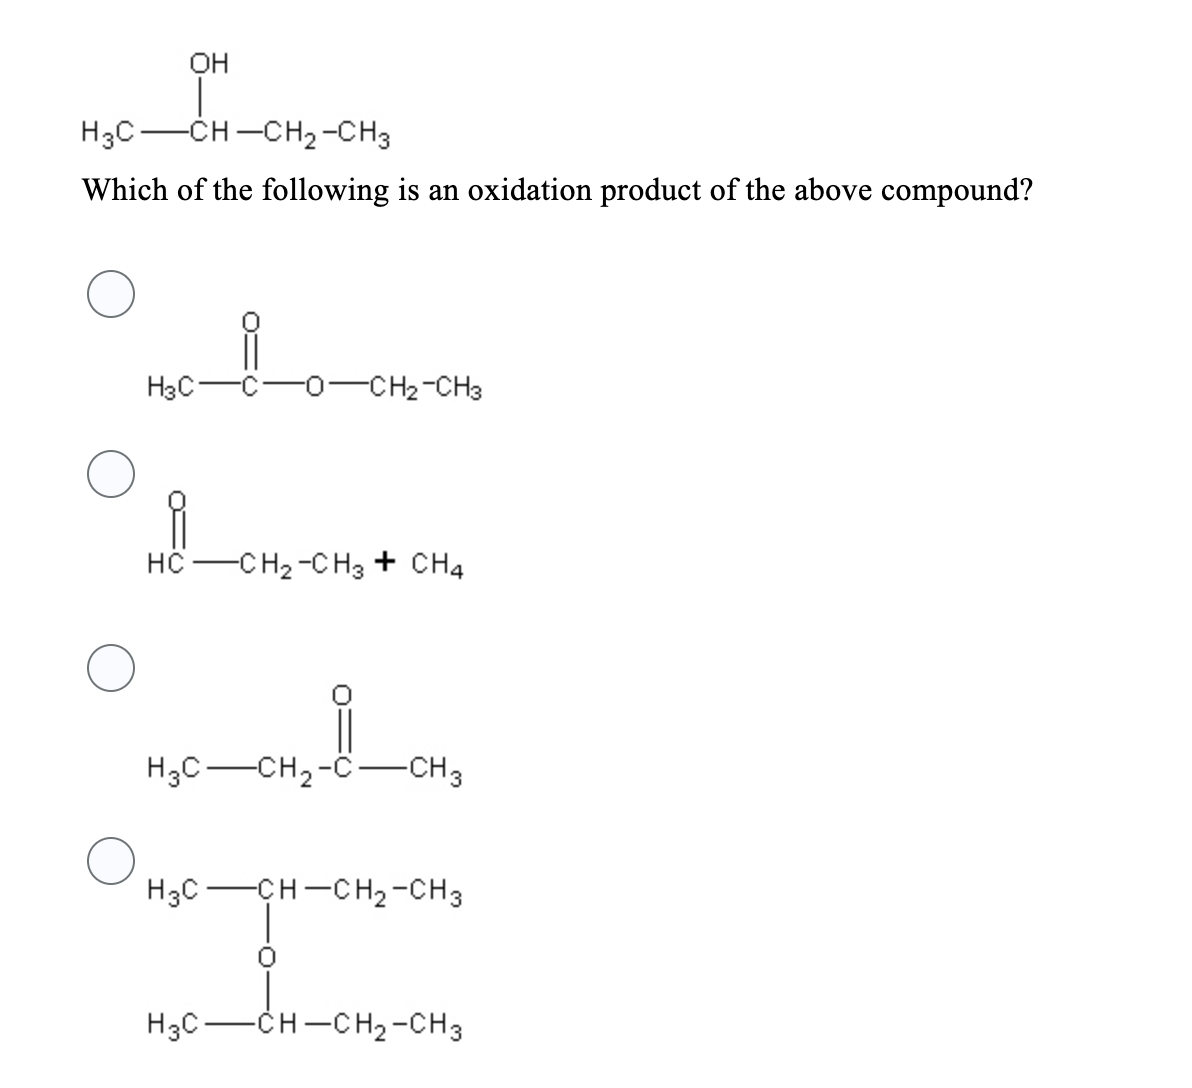 OH
H3C -CH-CH₂-CH3
Which of the following is an oxidation product of the above compound?
H3C-
i
HC
-O-CH2-CH3
-CH₂-CH3 + CH4
H3C-CH₂-C
-CH3
H3C-CH-CH₂-CH3
H3C-CH-CH₂-CH3